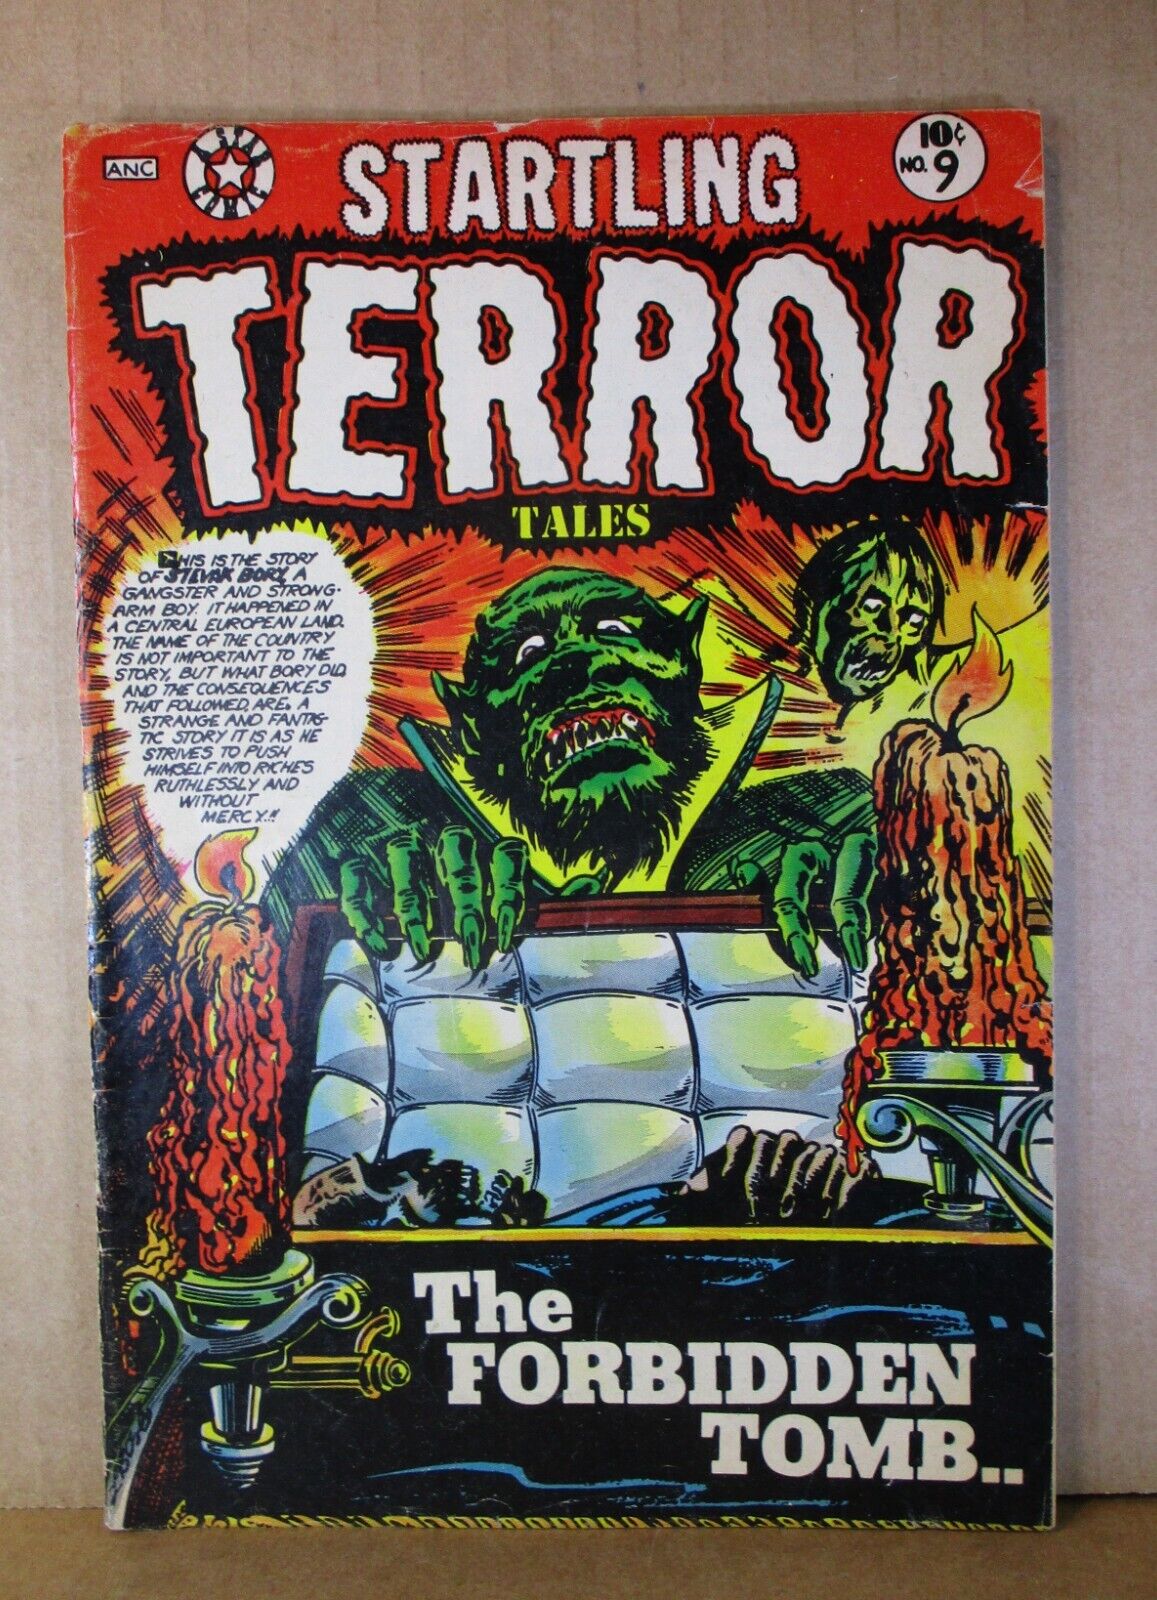 Startling Terror Tales 9 L.B. Cole Ghoul Corpse Forbidden Tomb 1954 Star Horror